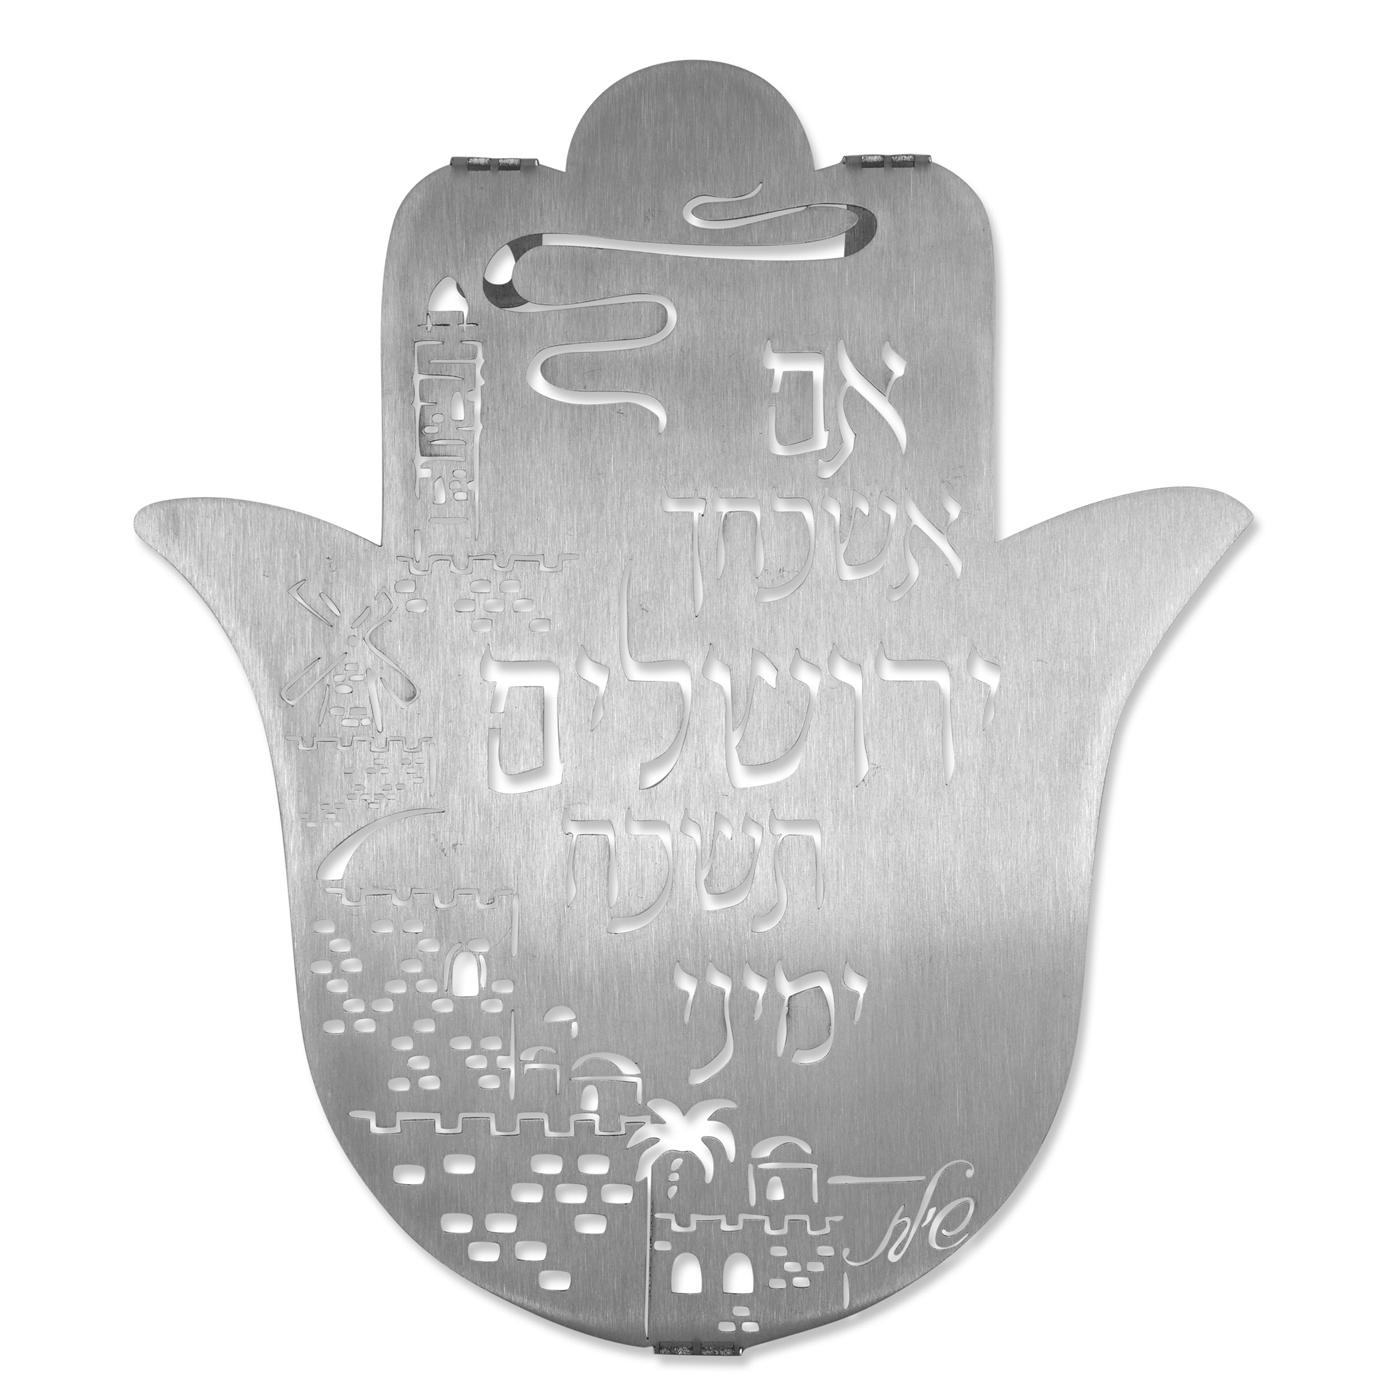 Stainless Steel Hamsa Wall Hanging with Jerusalem Cut-Outs - 1